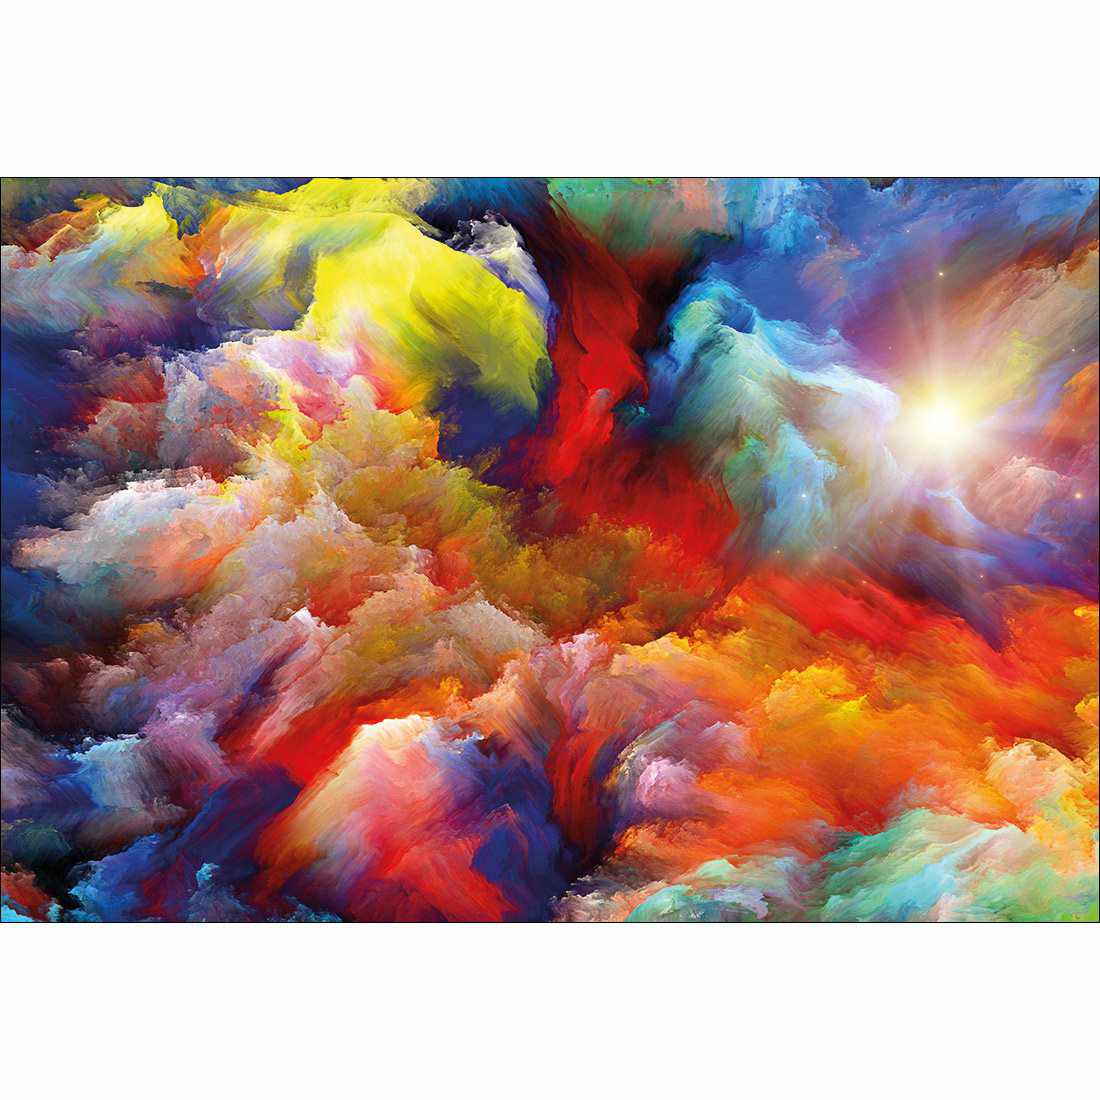 Clouds Of Colour Canvas Art-Canvas-Wall Art Designs-45x30cm-Canvas - No Frame-Wall Art Designs